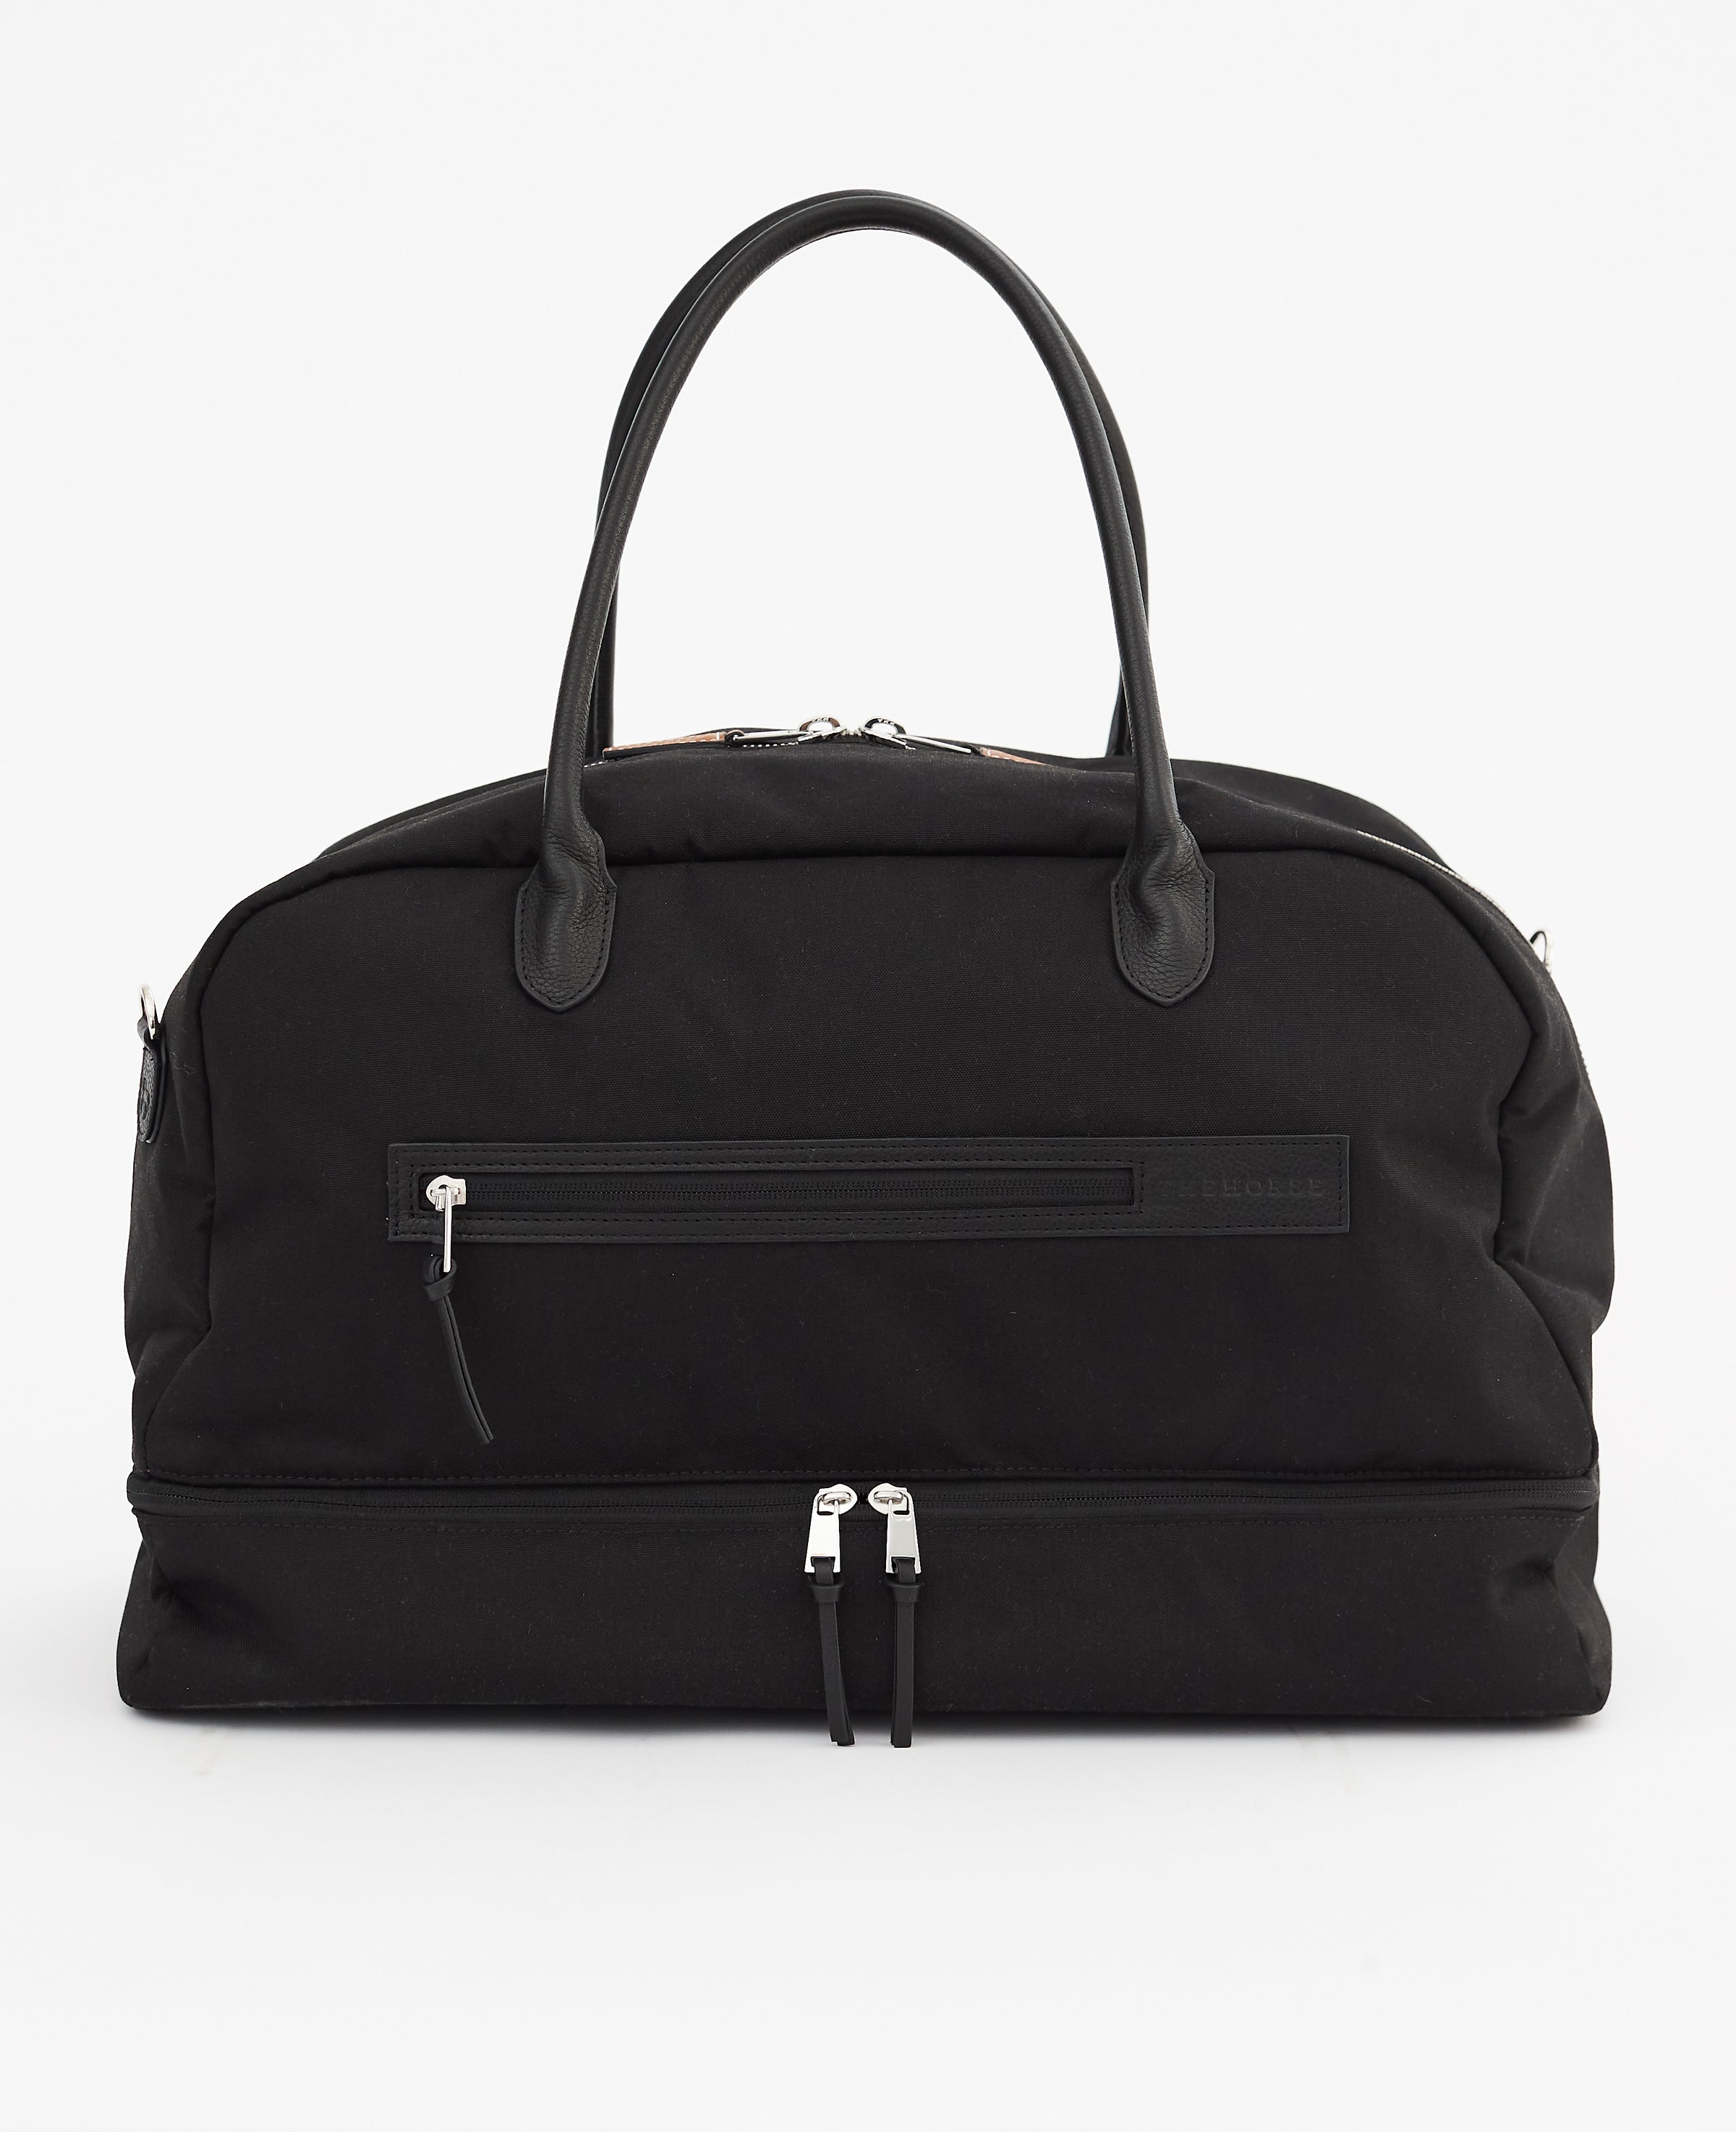 The Weekend Tote Bag Weekender Overnight Bag Black by The Horse®